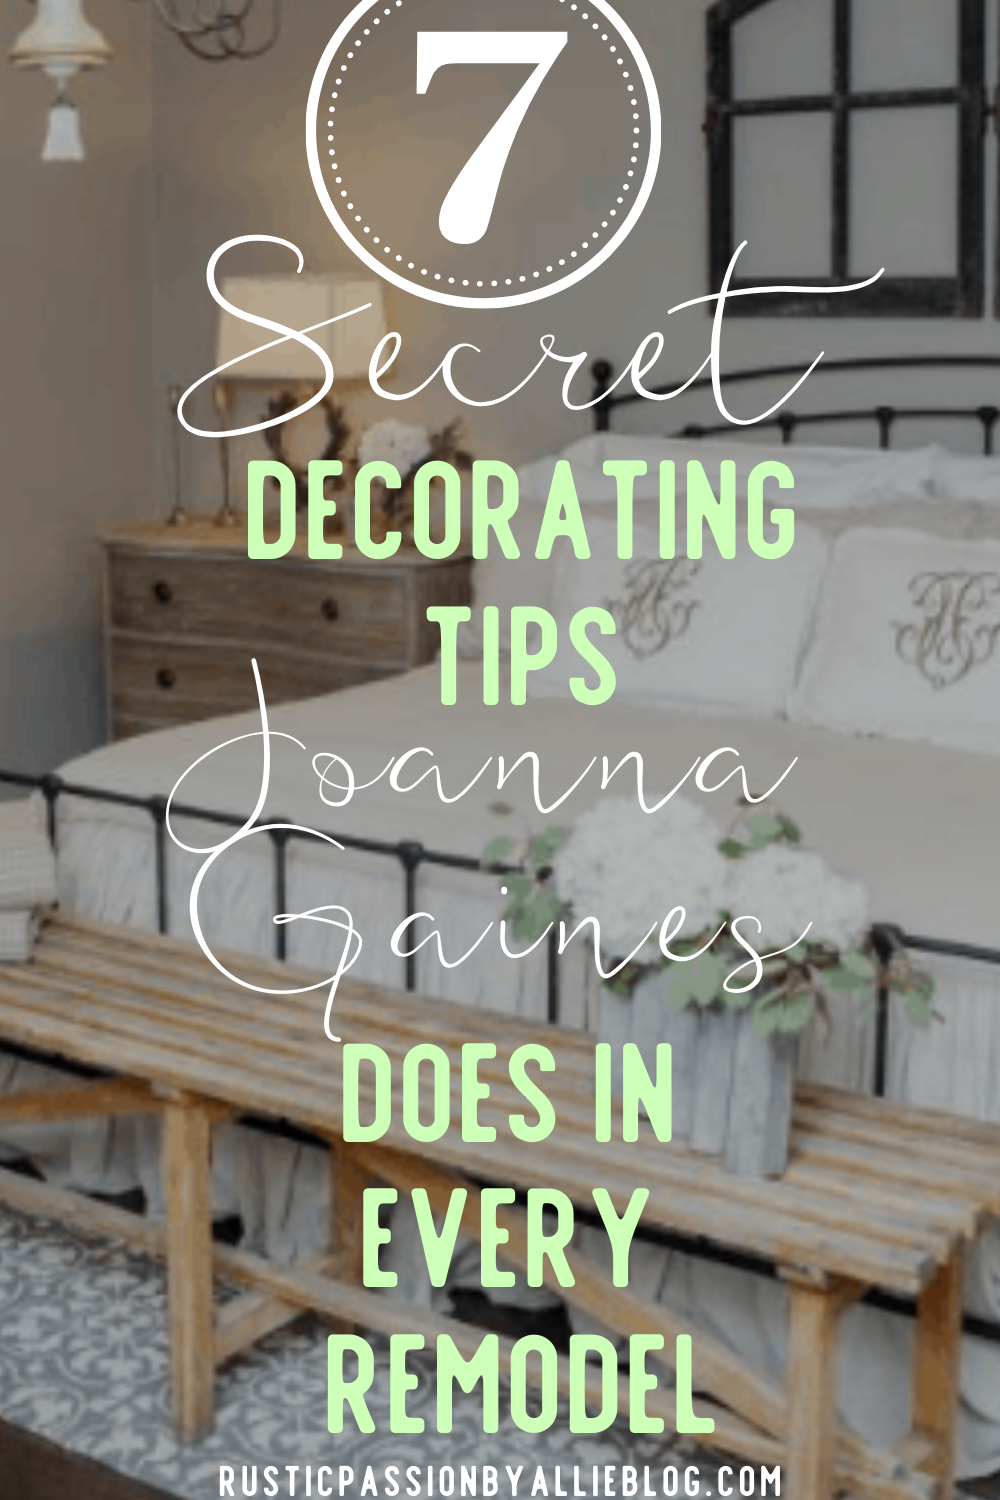 7 secret decorating tips Joanna Gaines does in every remodel. - 7 secret decorating tips Joanna Gaines does in every remodel. -   16 farmhouse wall decorations joanna gaines ideas